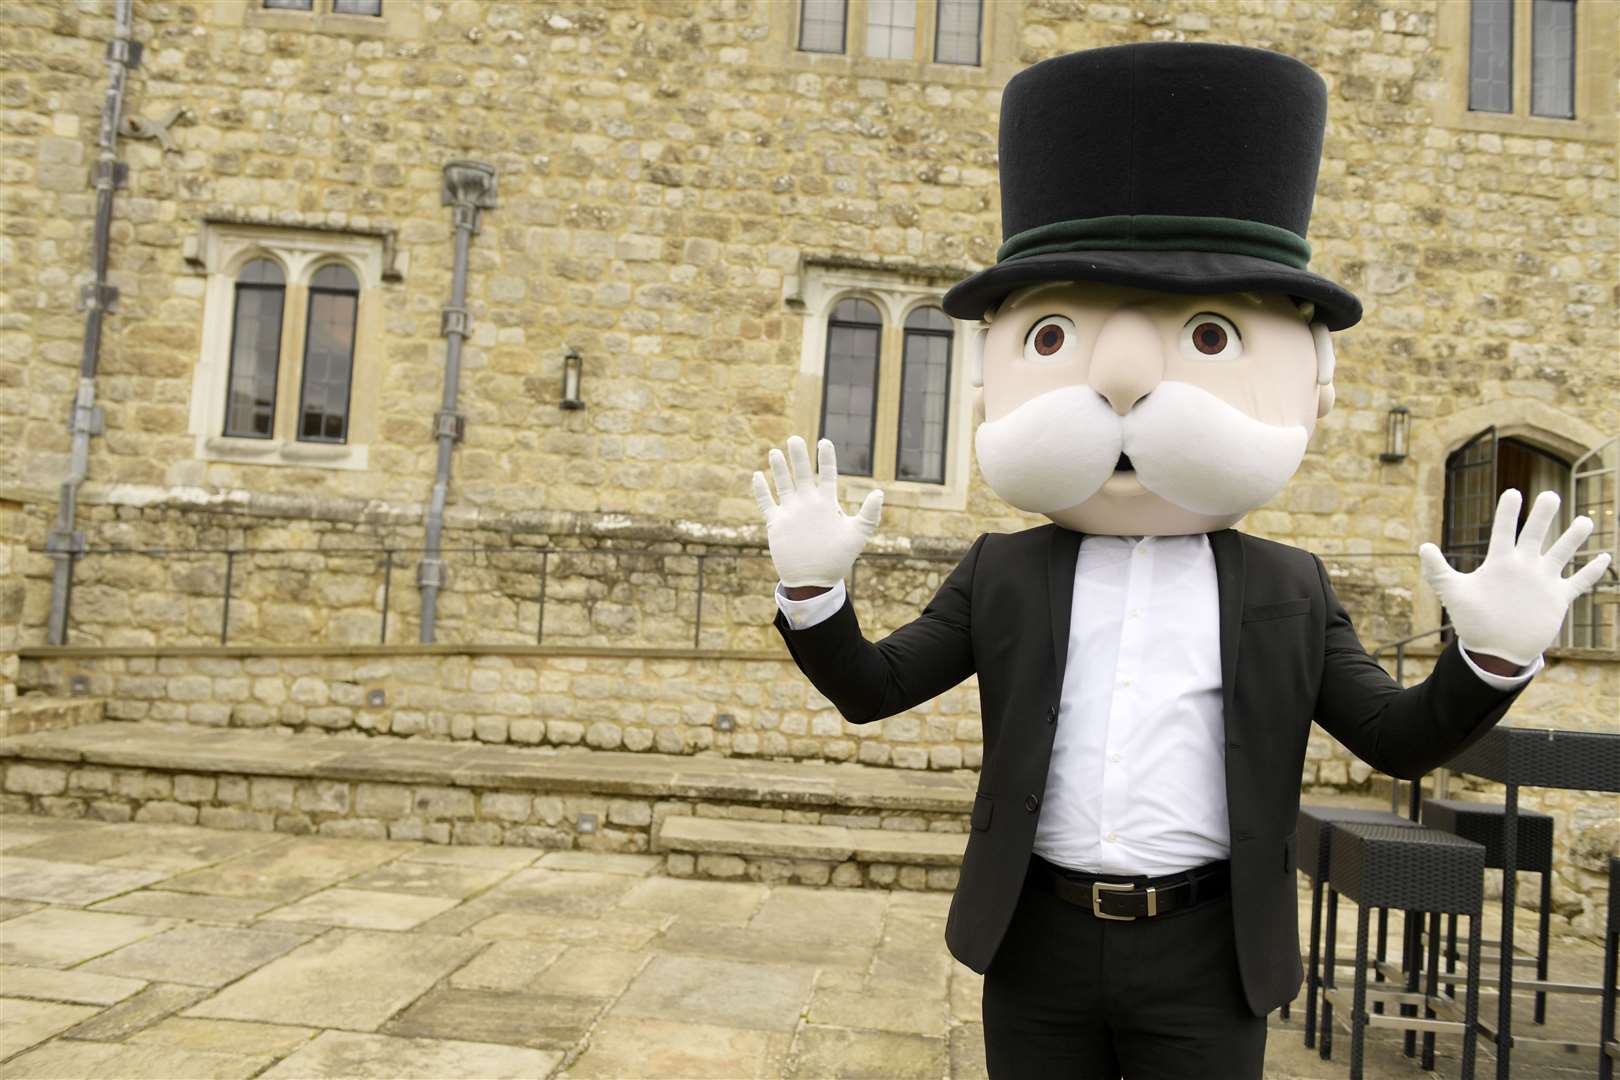 Mr Monopoly will be getting accustomed to Faversham